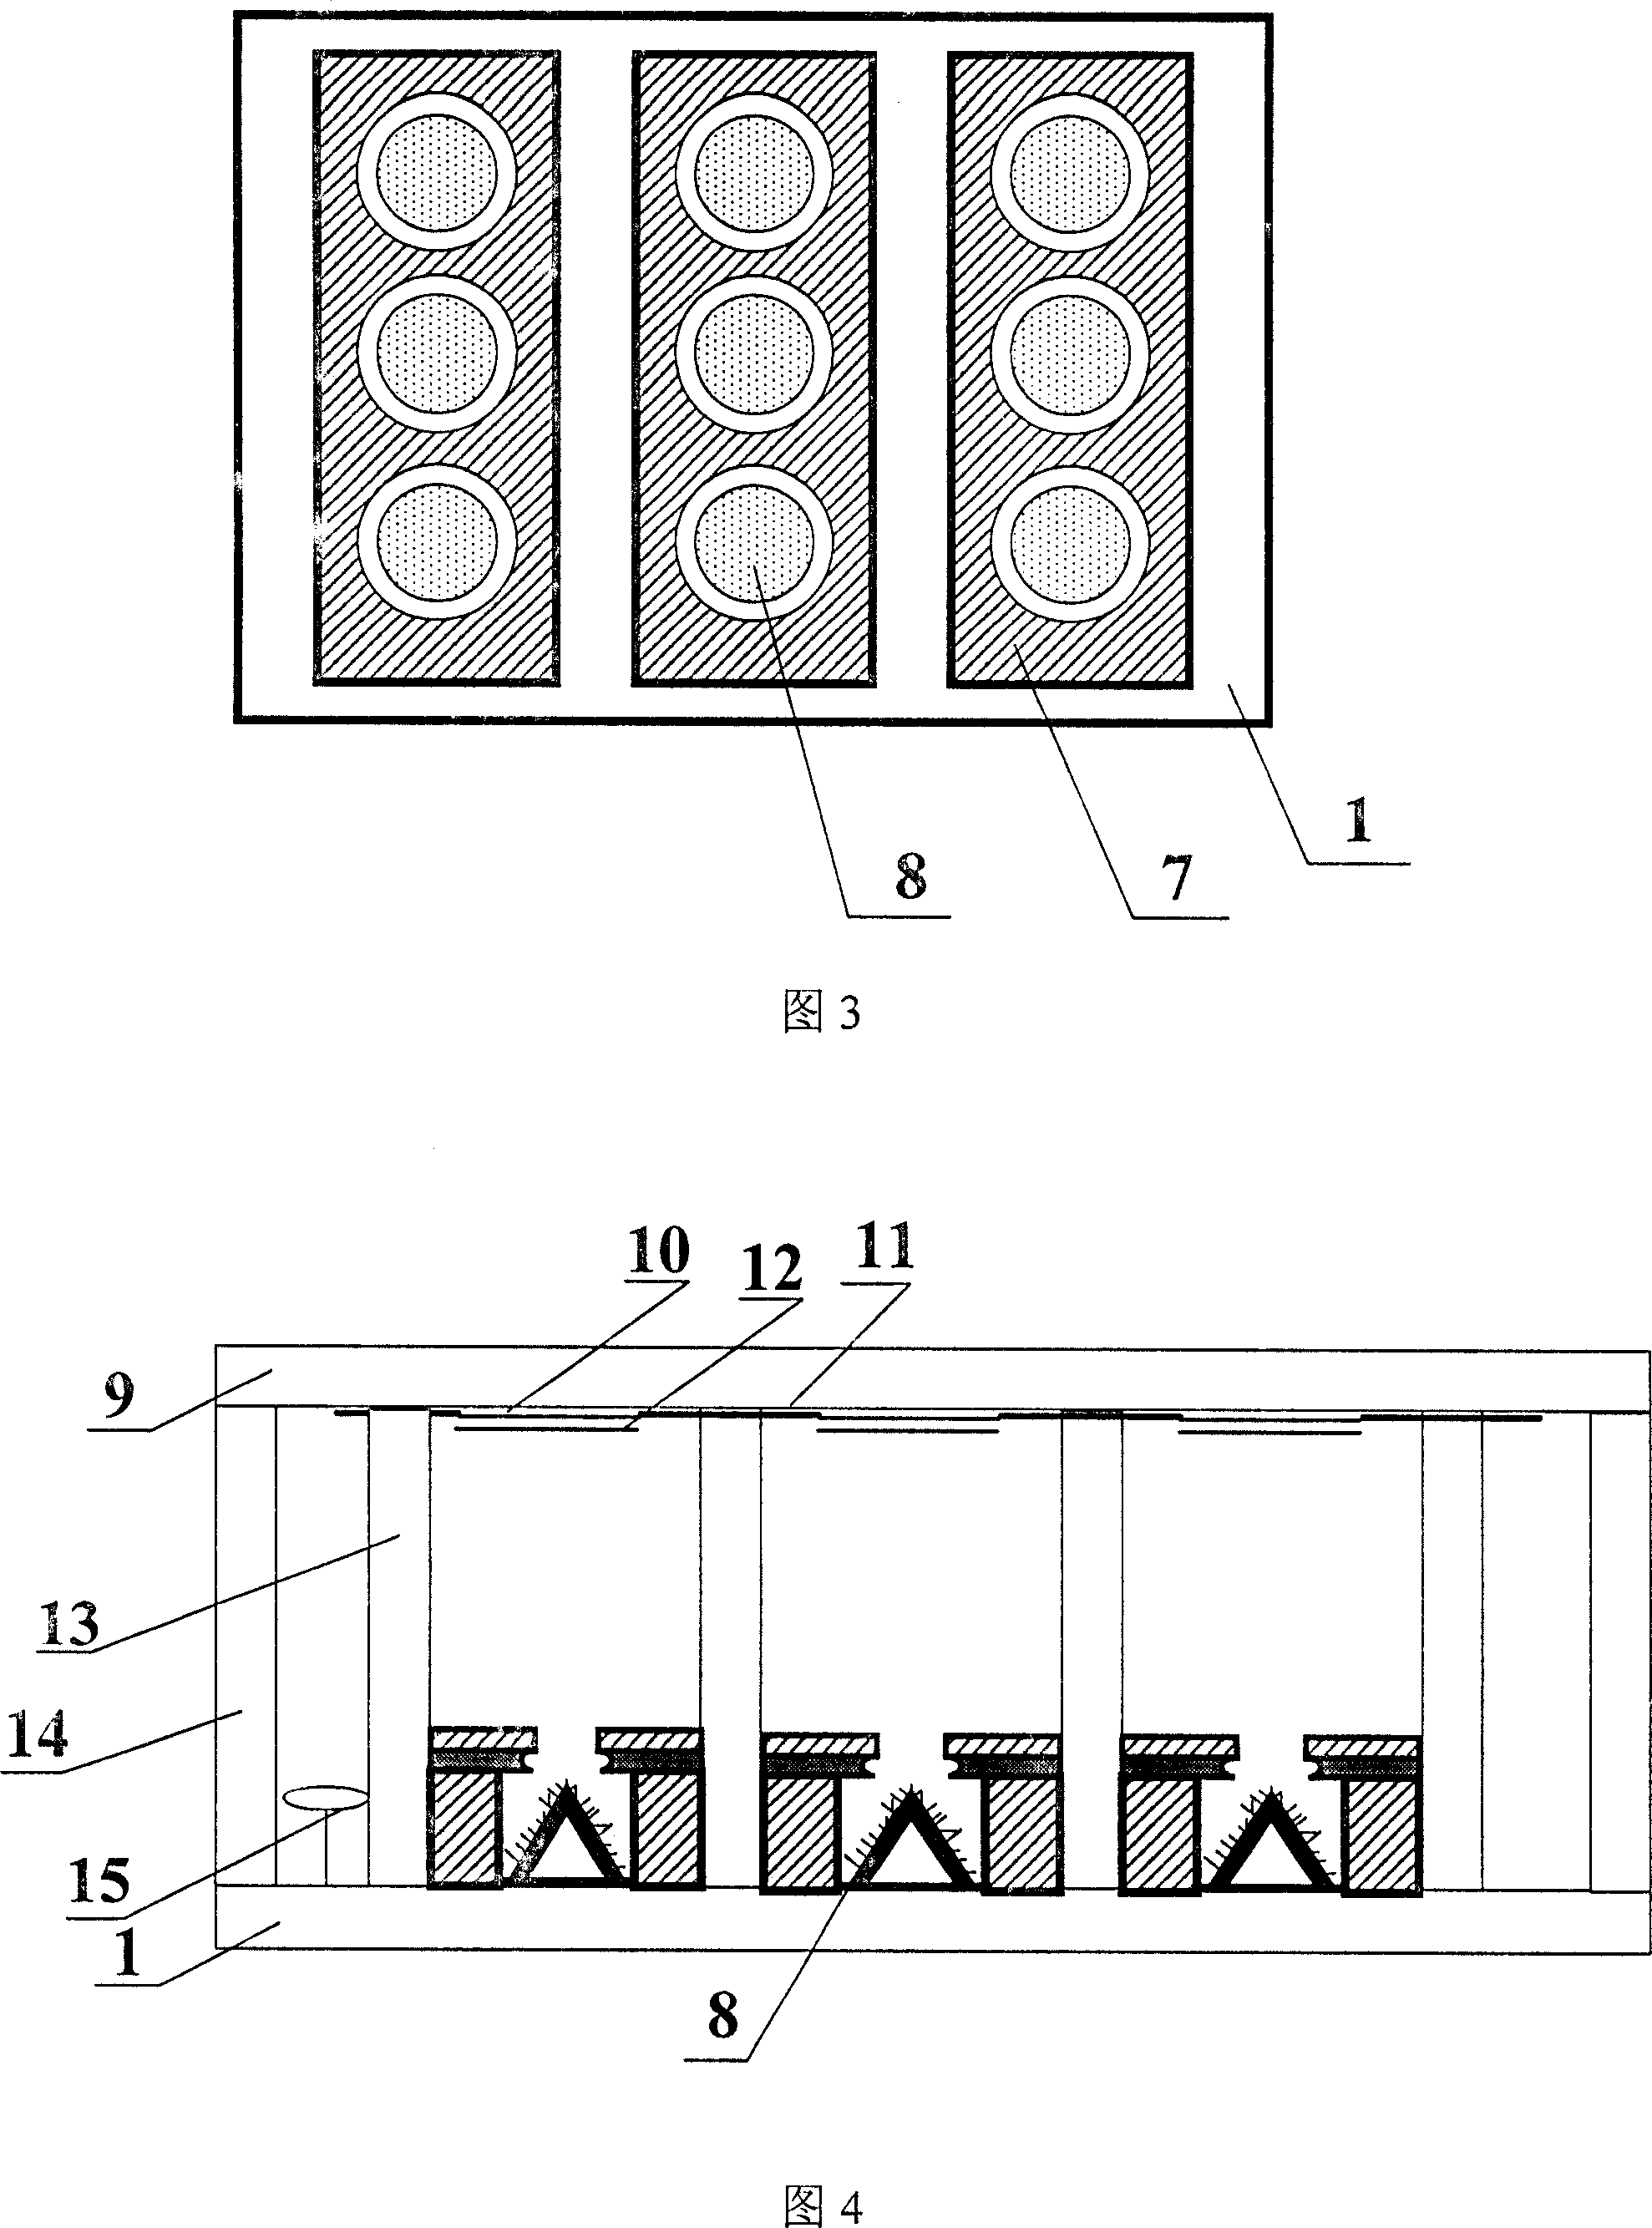 Flat-board display of internal concave type grid-controlled array structure and mfg. process